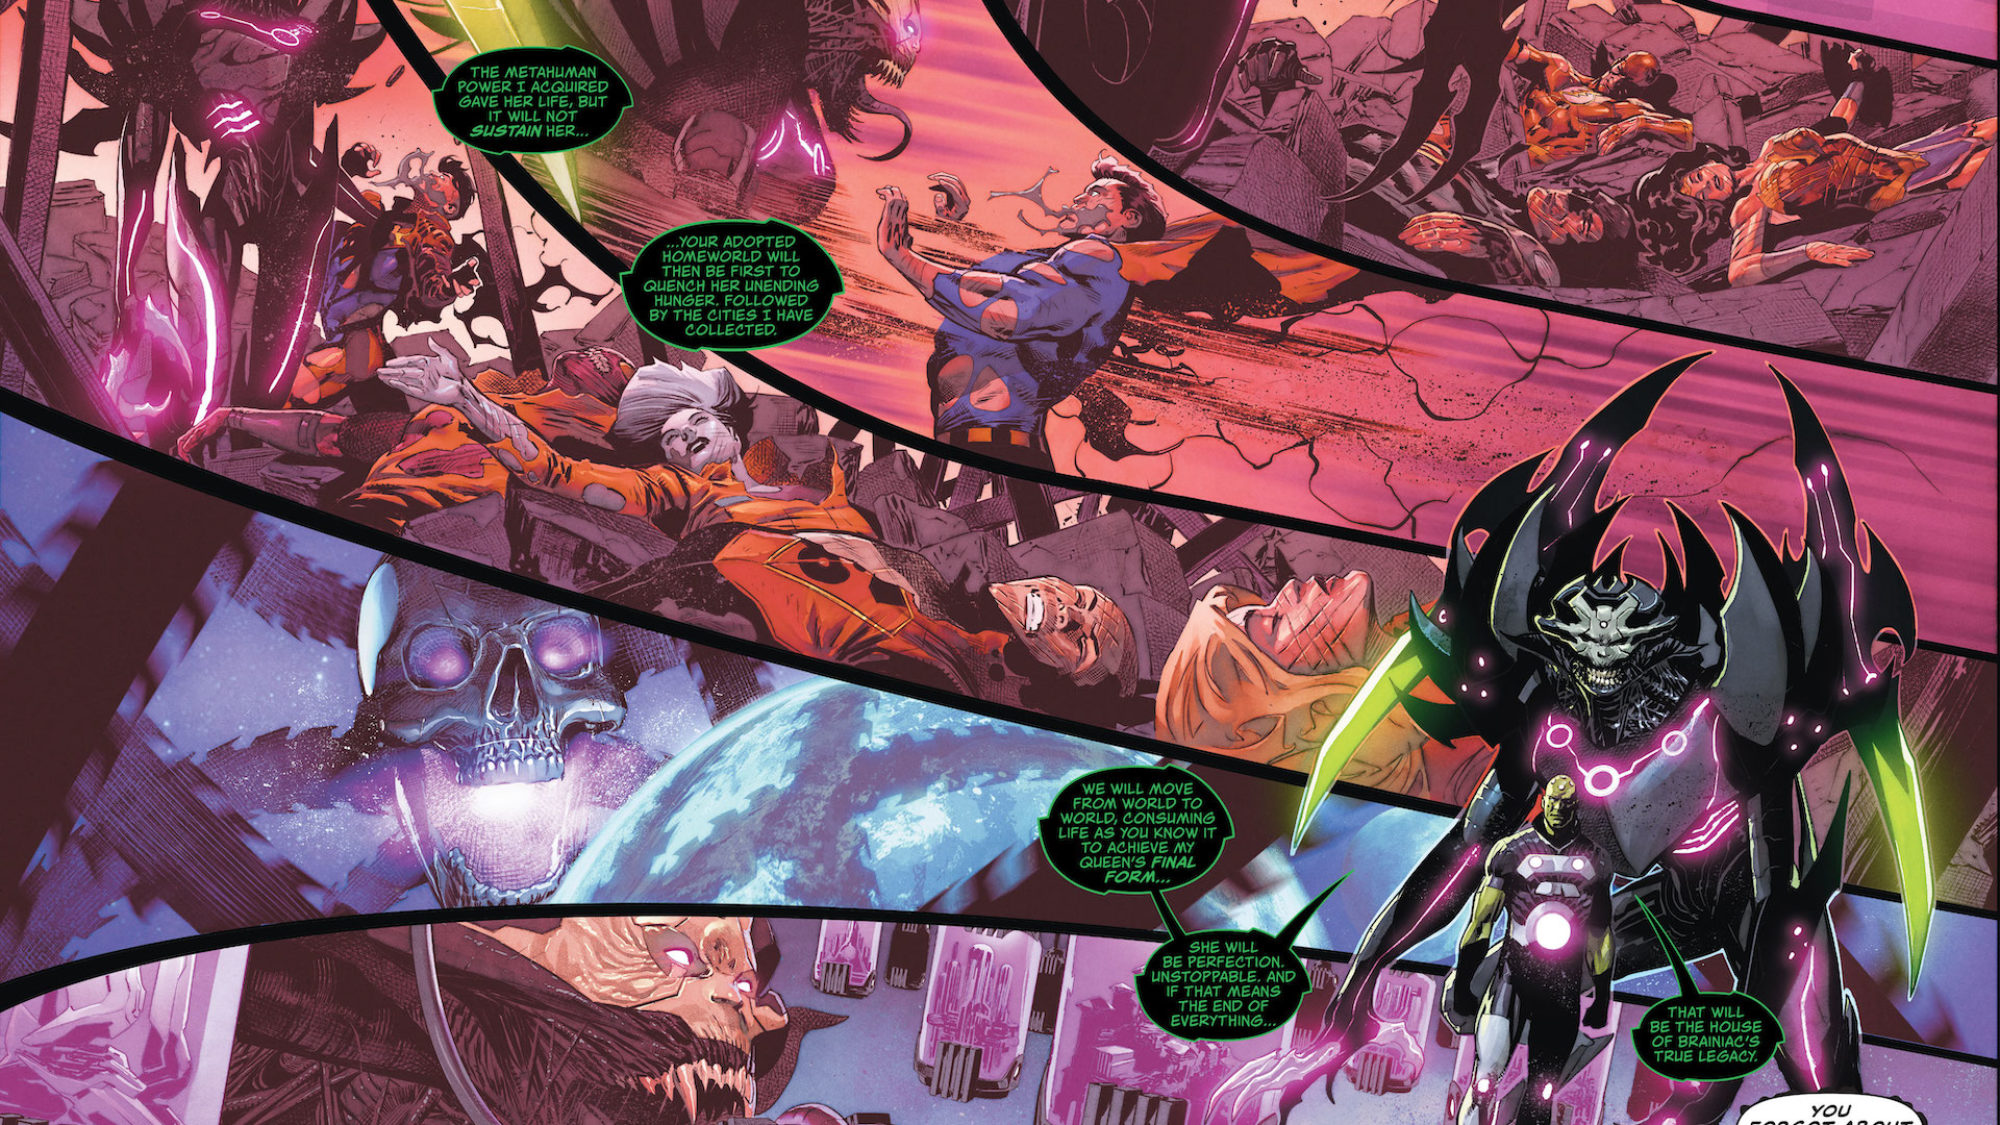 Action Comics No. 1066 Preview: Braniac Queen Unleashed